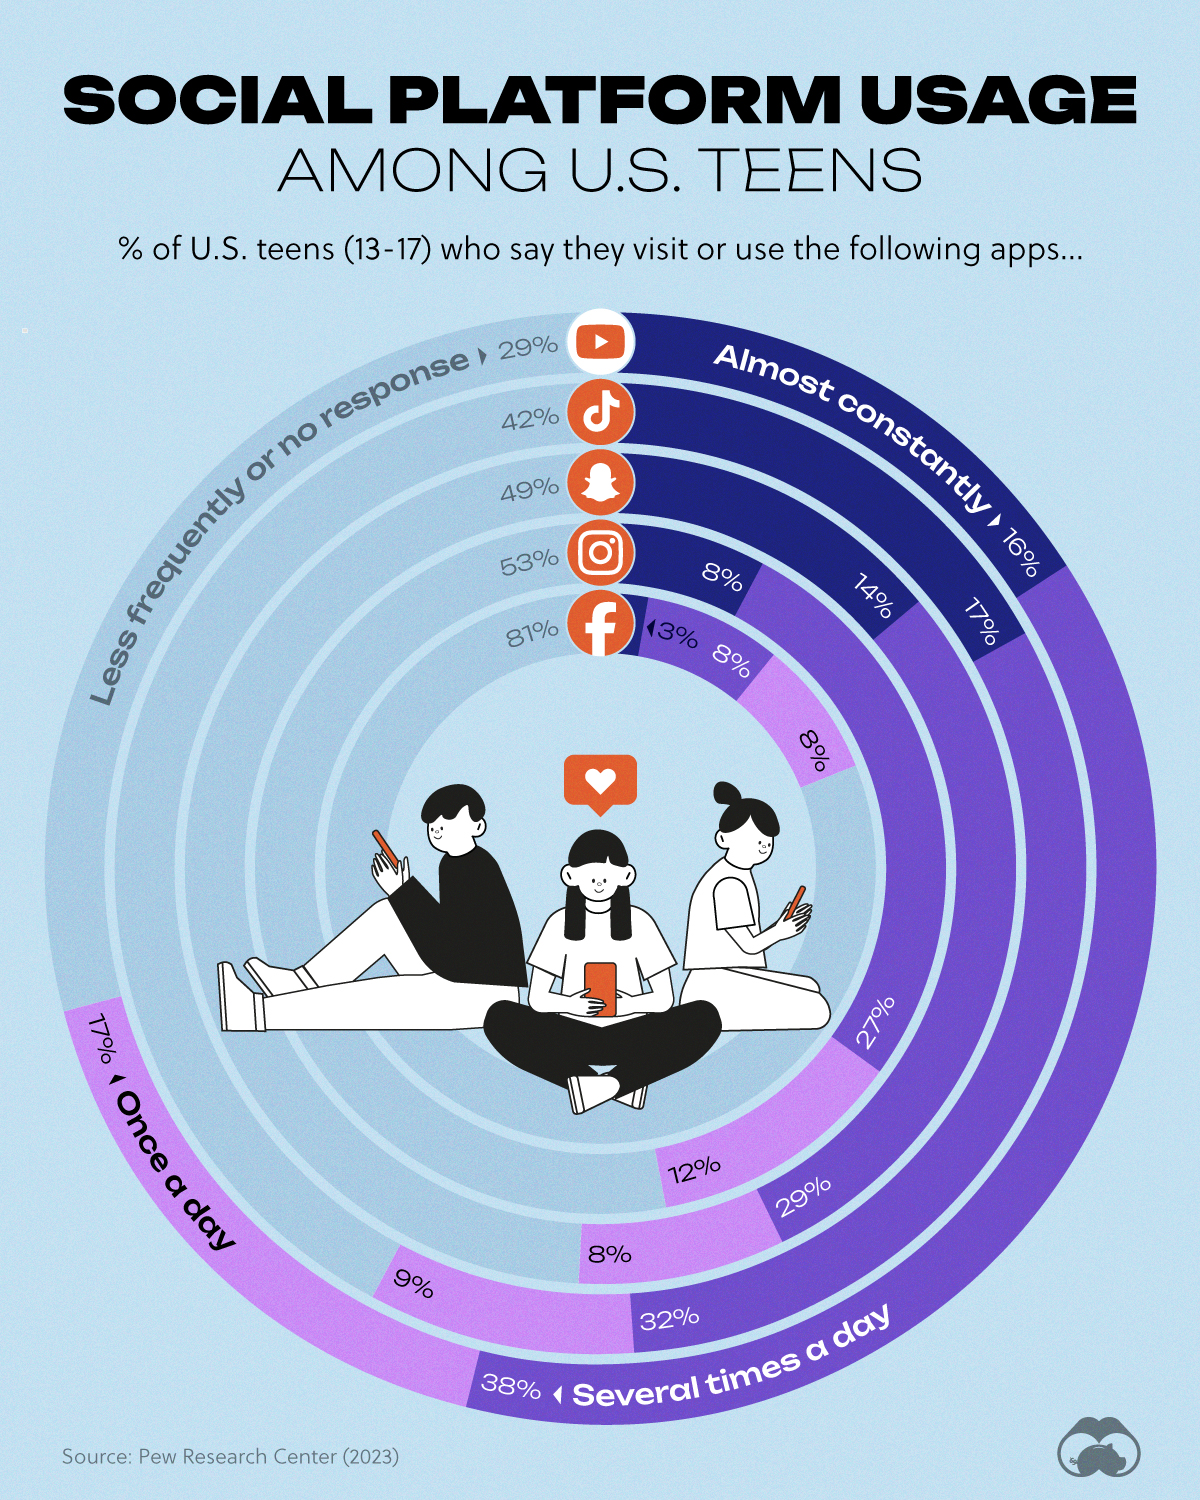 Graphic showing the results of a Pew Research survey on social platform usage among American teenagers.